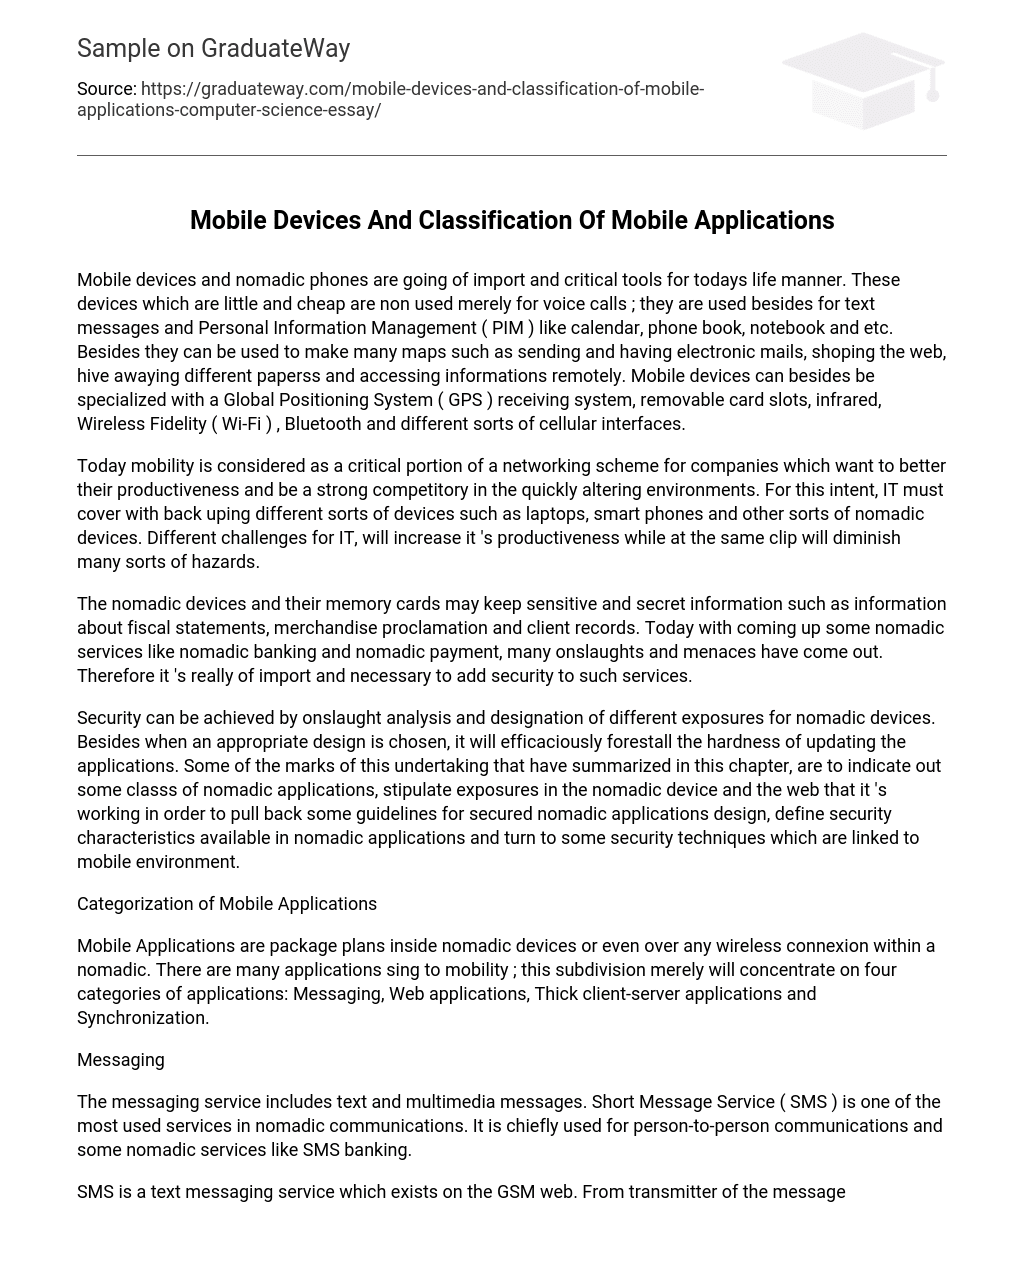 Mobile Devices And Classification Of Mobile Applications